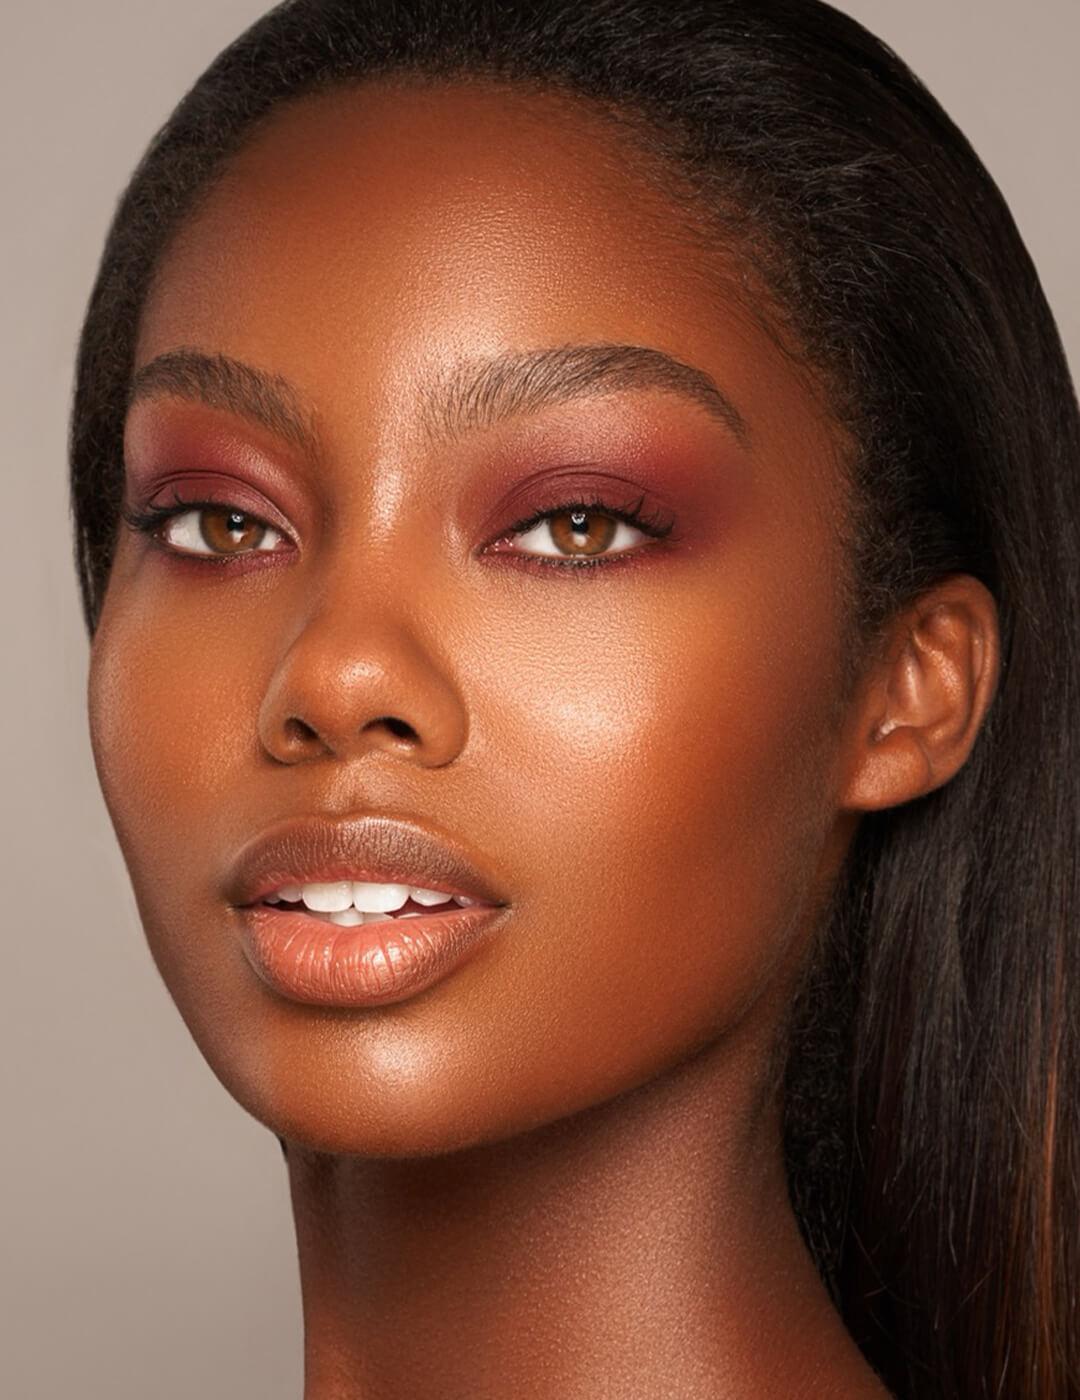 A photo of a Black woman looking beautifully wearing a burgandy metallic eyeshadow and rich blush on